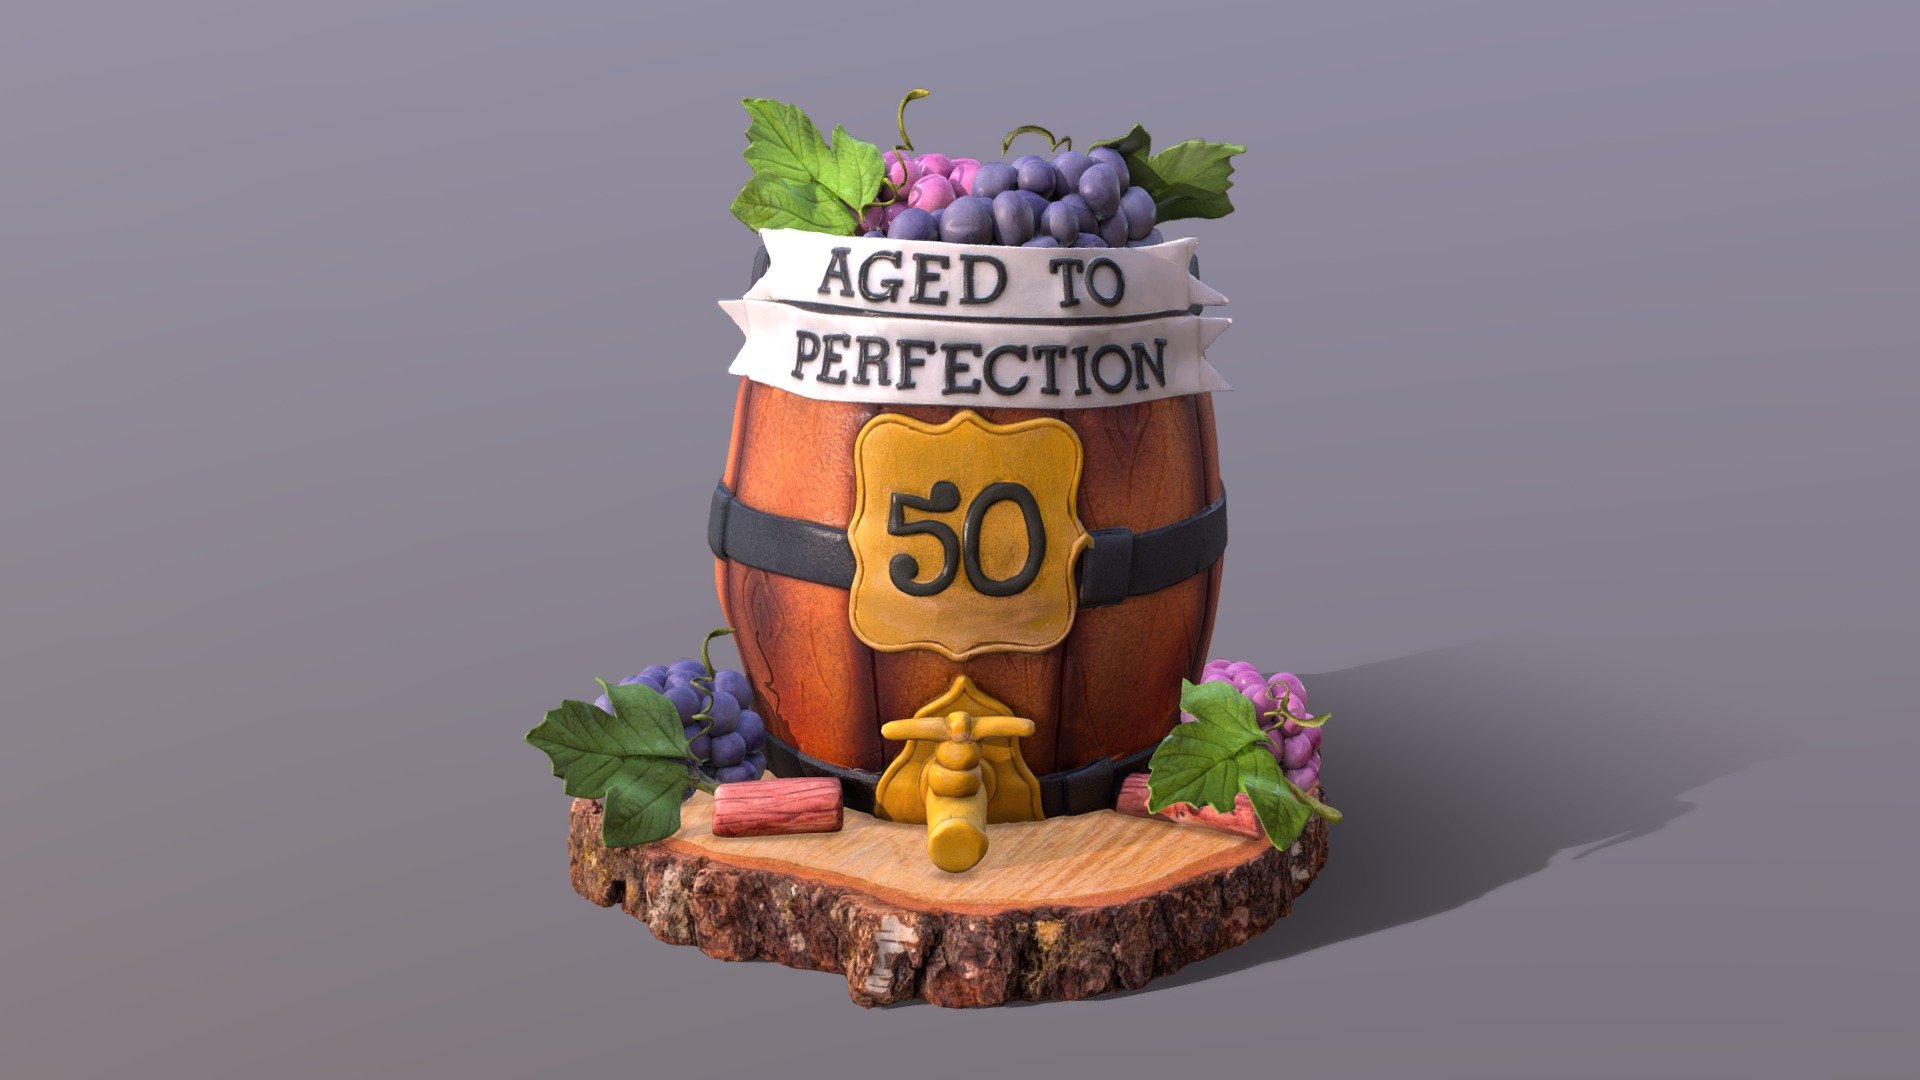 3D scan of a elegant Aged To Perfection 50 Age Barrel Cake on the wooden slice which is made by CAKESBURG Online Premium Cake Shop in UK. You can also order real cake from this link: https://cakesburg.co.uk/products/age-to-perfection-50-cake?_pos=1&amp;_sid=a15854854&amp;_ss=r




Cake Textures 4096*4096px PBR photoscan-based materials (Base Color, Normal, Roughness, Specular, AO)

Grape Textures 4096*4096px PBR photoscan-based materials (Base Color, Normal, Roughness, Specular, AO)

Wooden Log Slice Textures 4096*4096px PBR photoscan-based materials (Base Color, Normal, Roughness, Specular, AO)
 - Aged To Perfection 50 Age Cake - Buy Royalty Free 3D model by Cakesburg Premium 3D Cake Shop (@Viscom_Cakesburg) 3d model